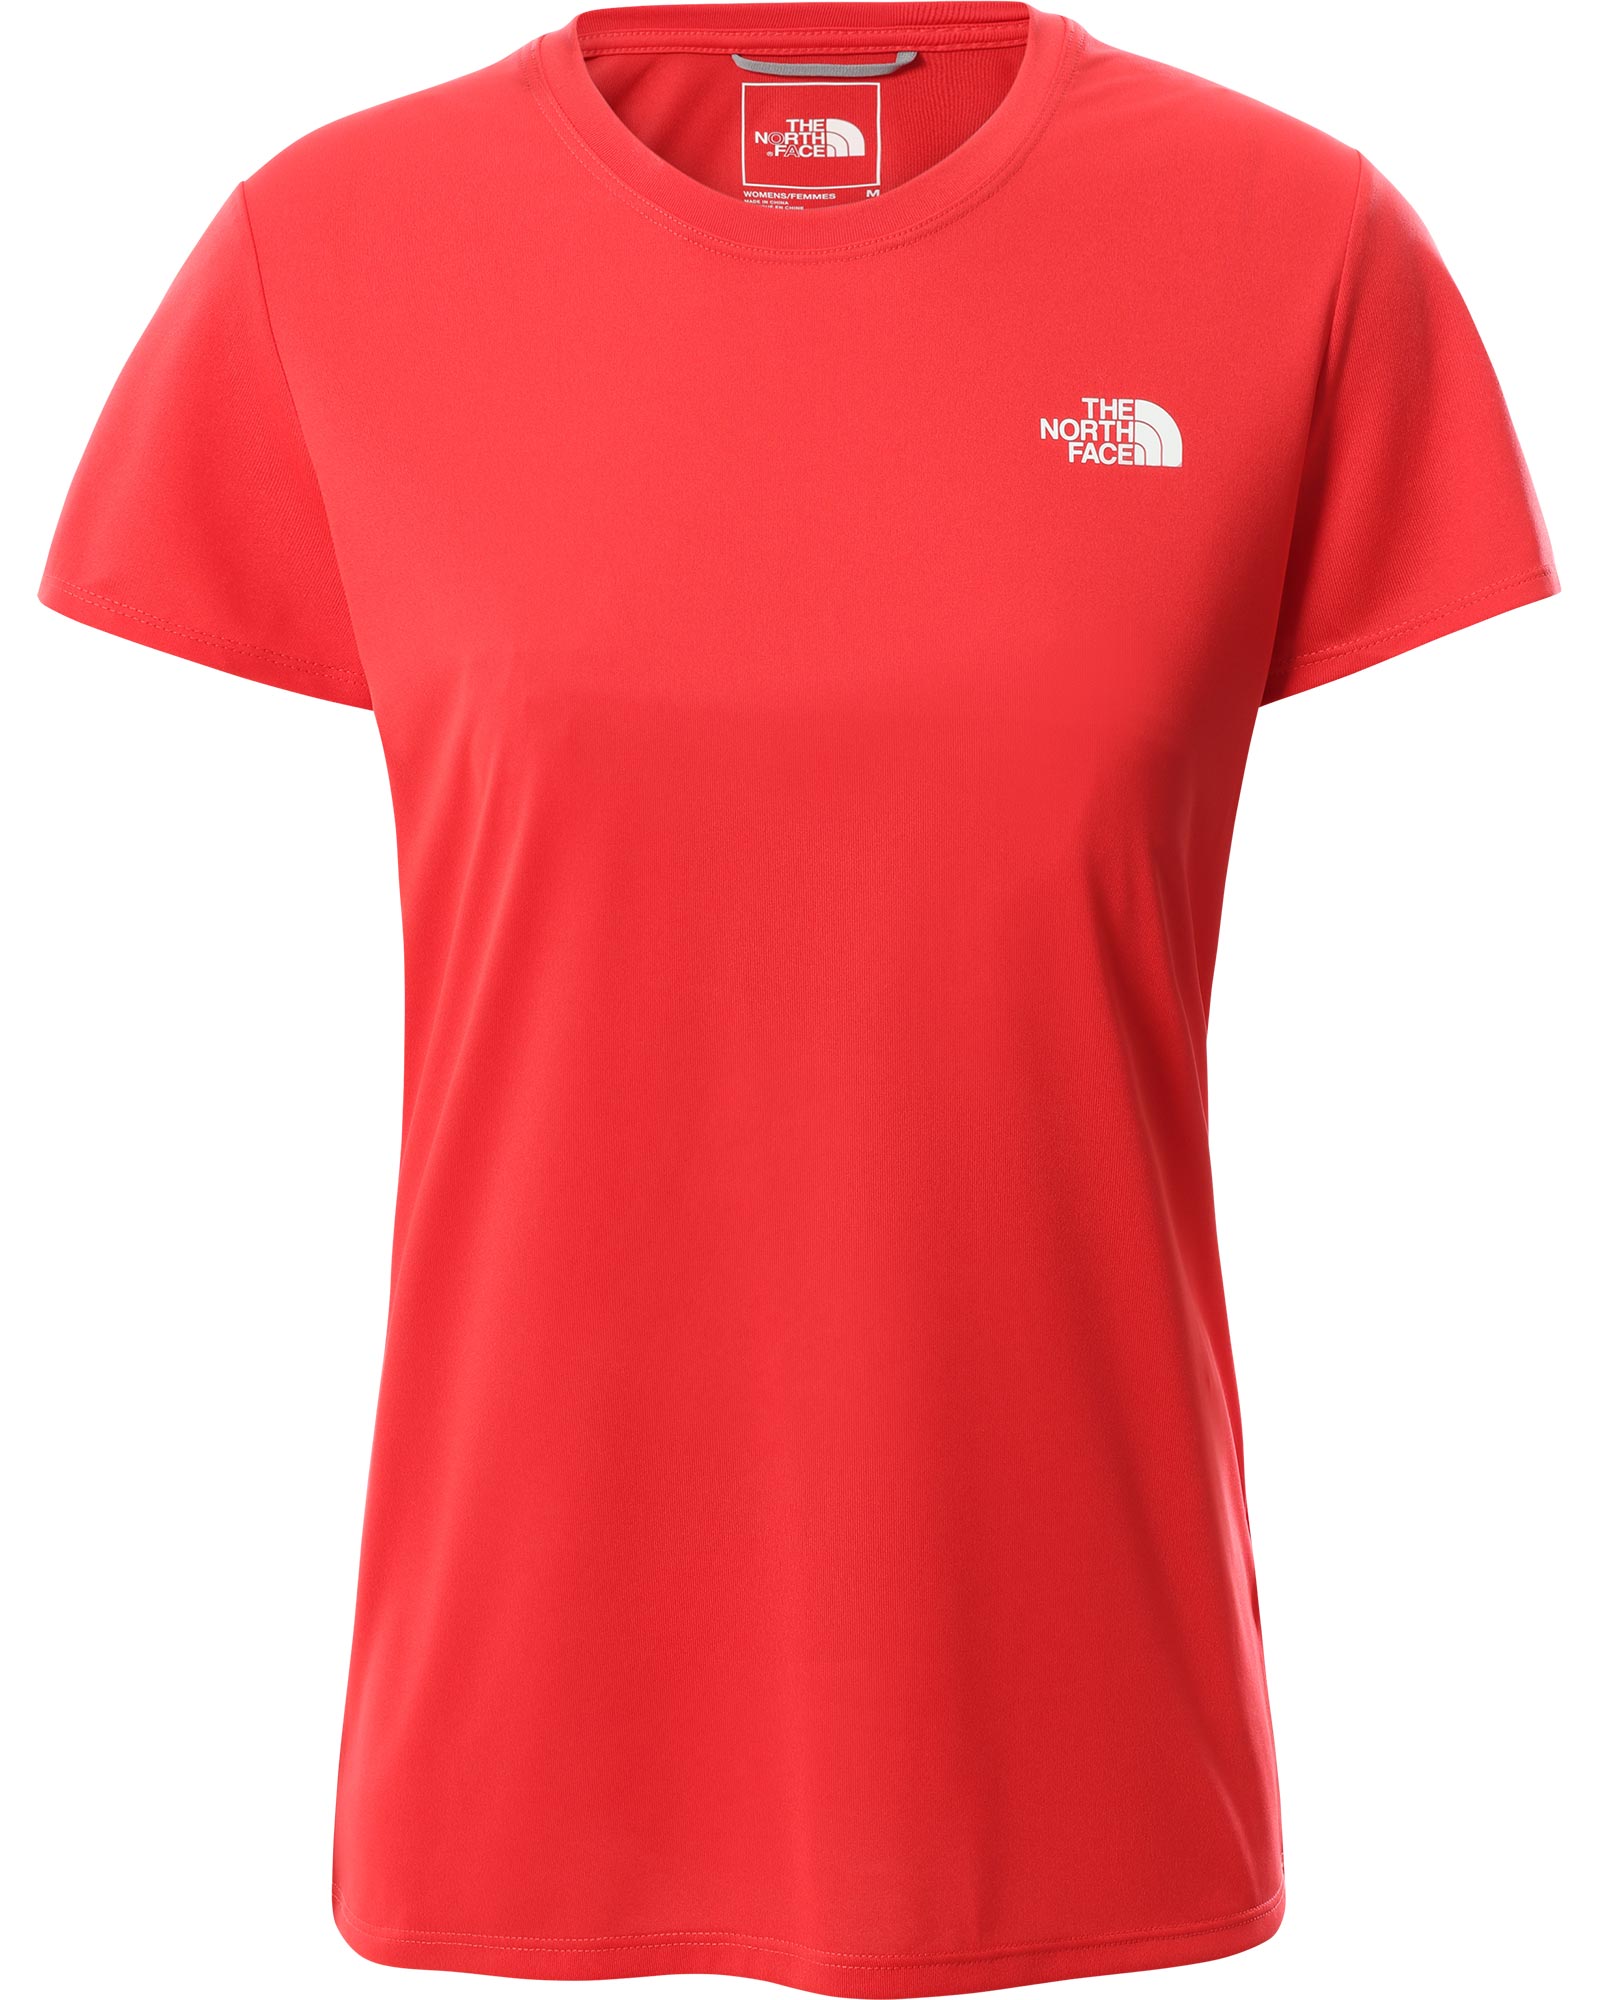 The North Face Reaxion Amp Women’s Crew T Shirt - Horizon Red XS